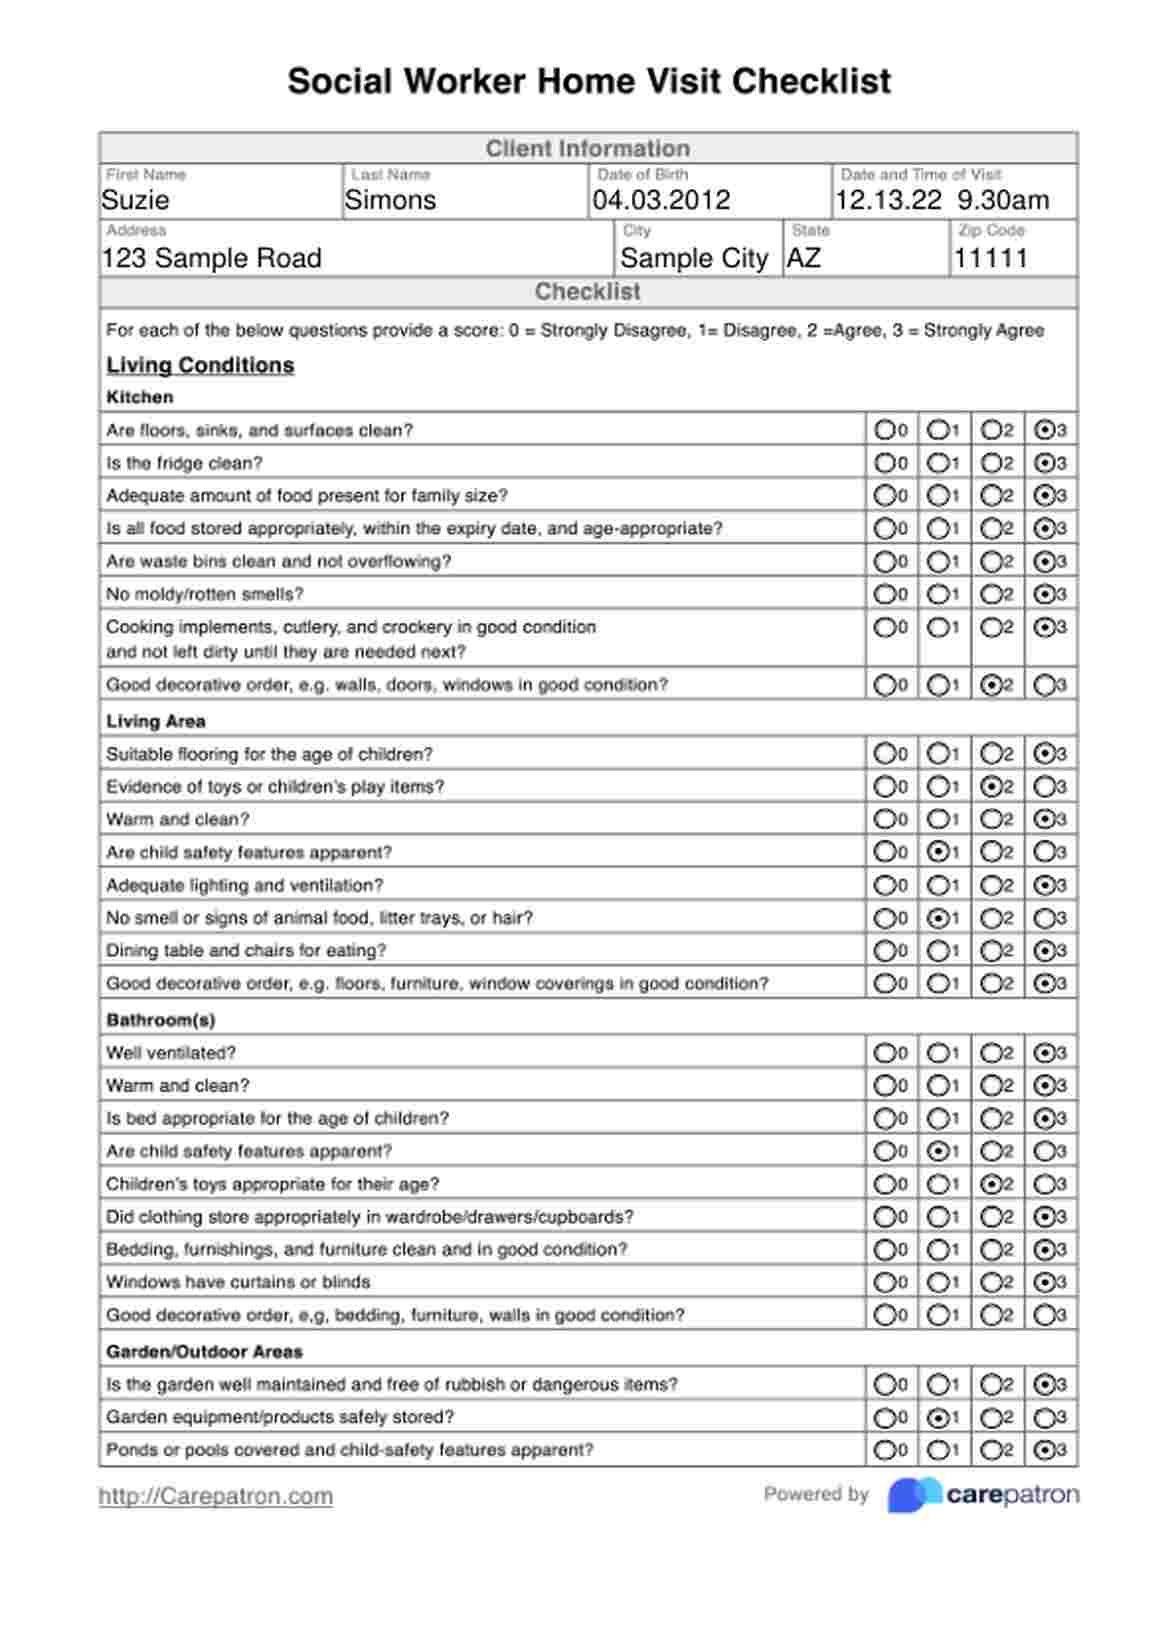 Social Worker Home Visit Checklist PDF Example